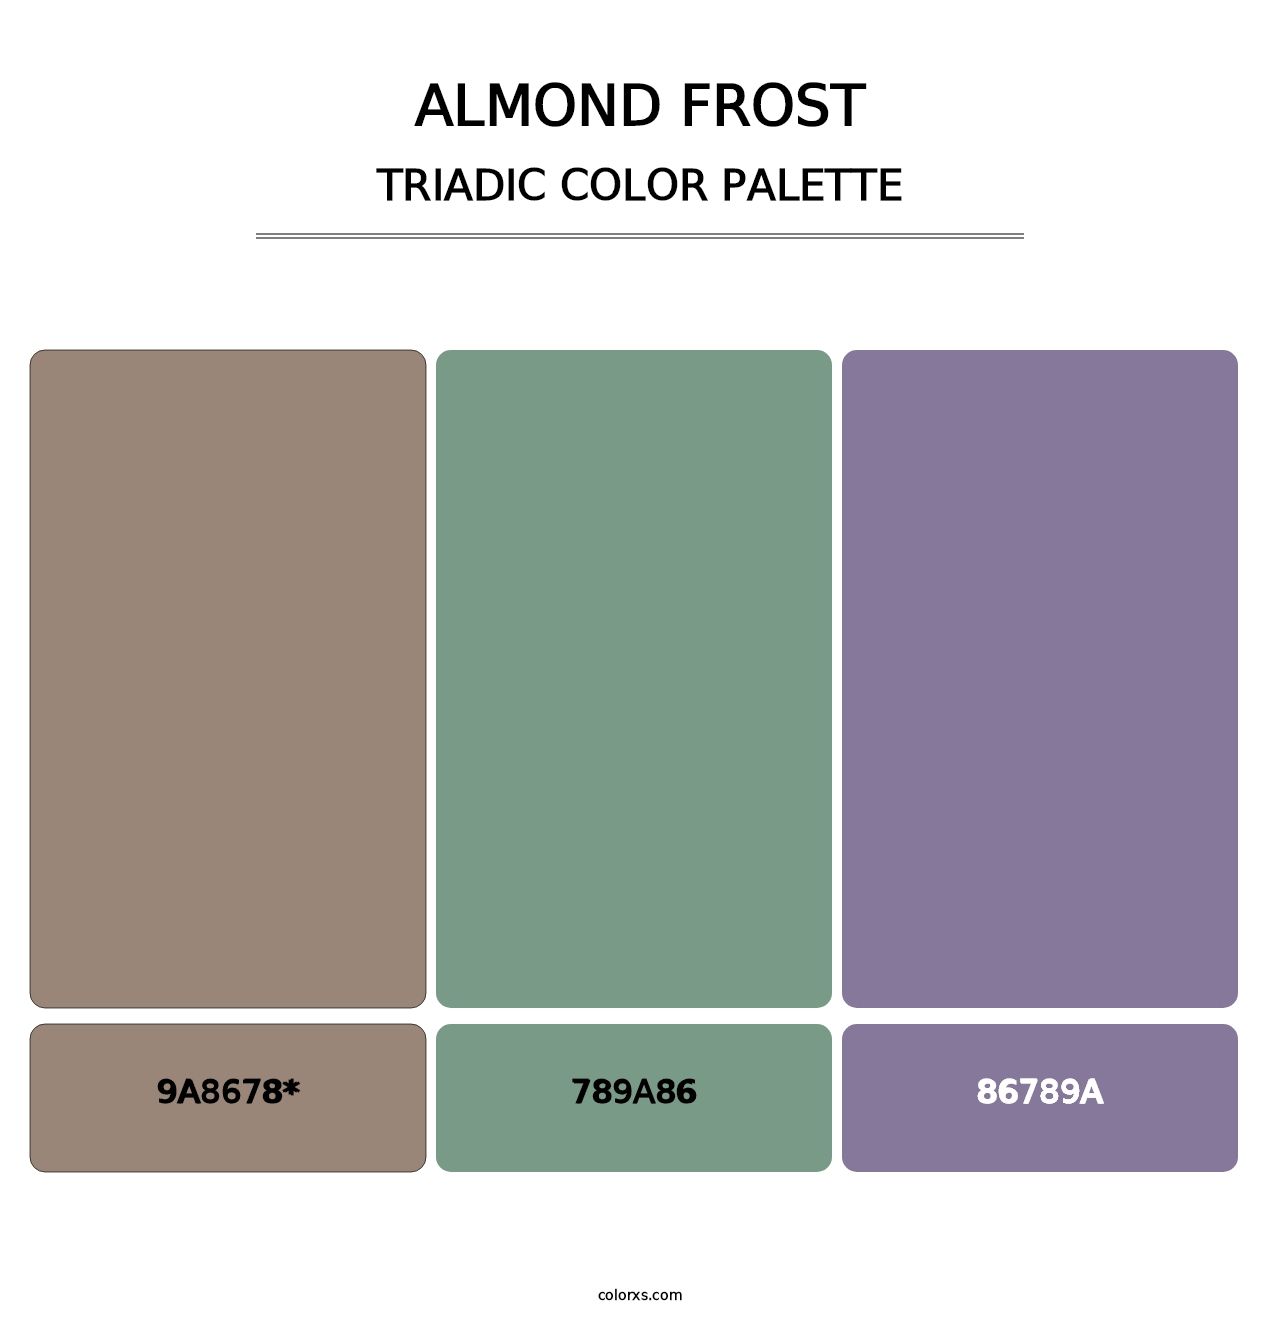 Almond Frost - Triadic Color Palette